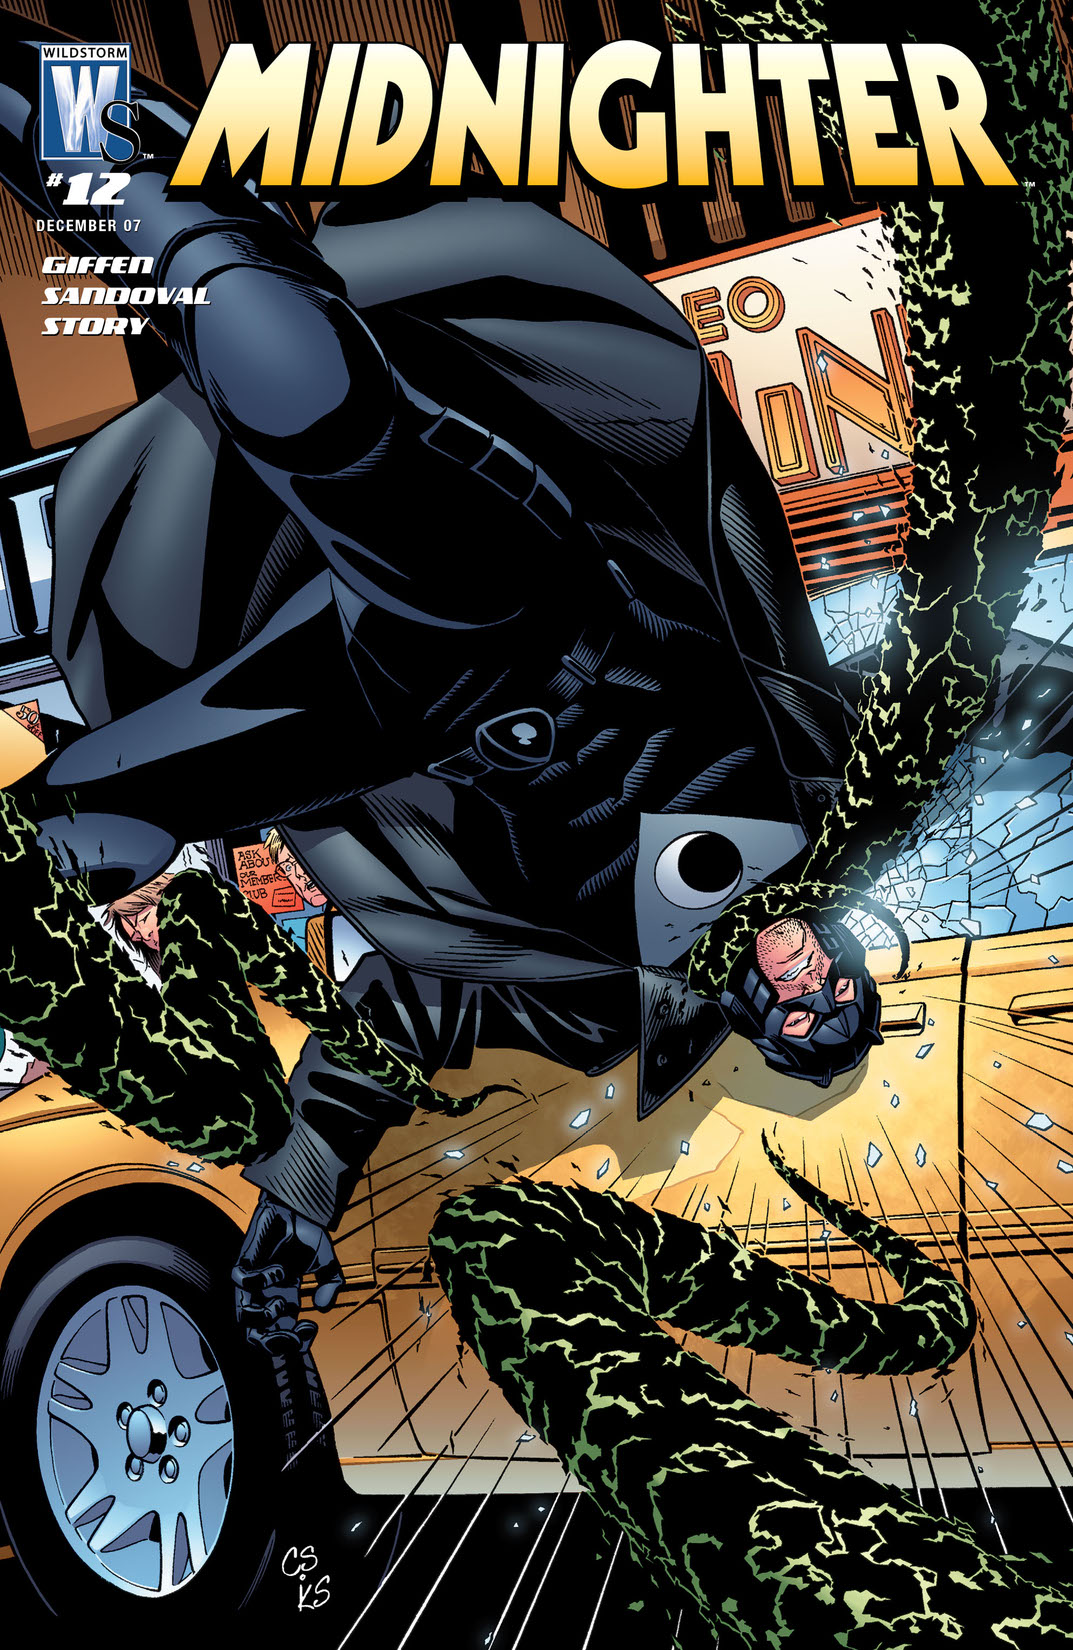 Midnighter (2006-) #12 preview images